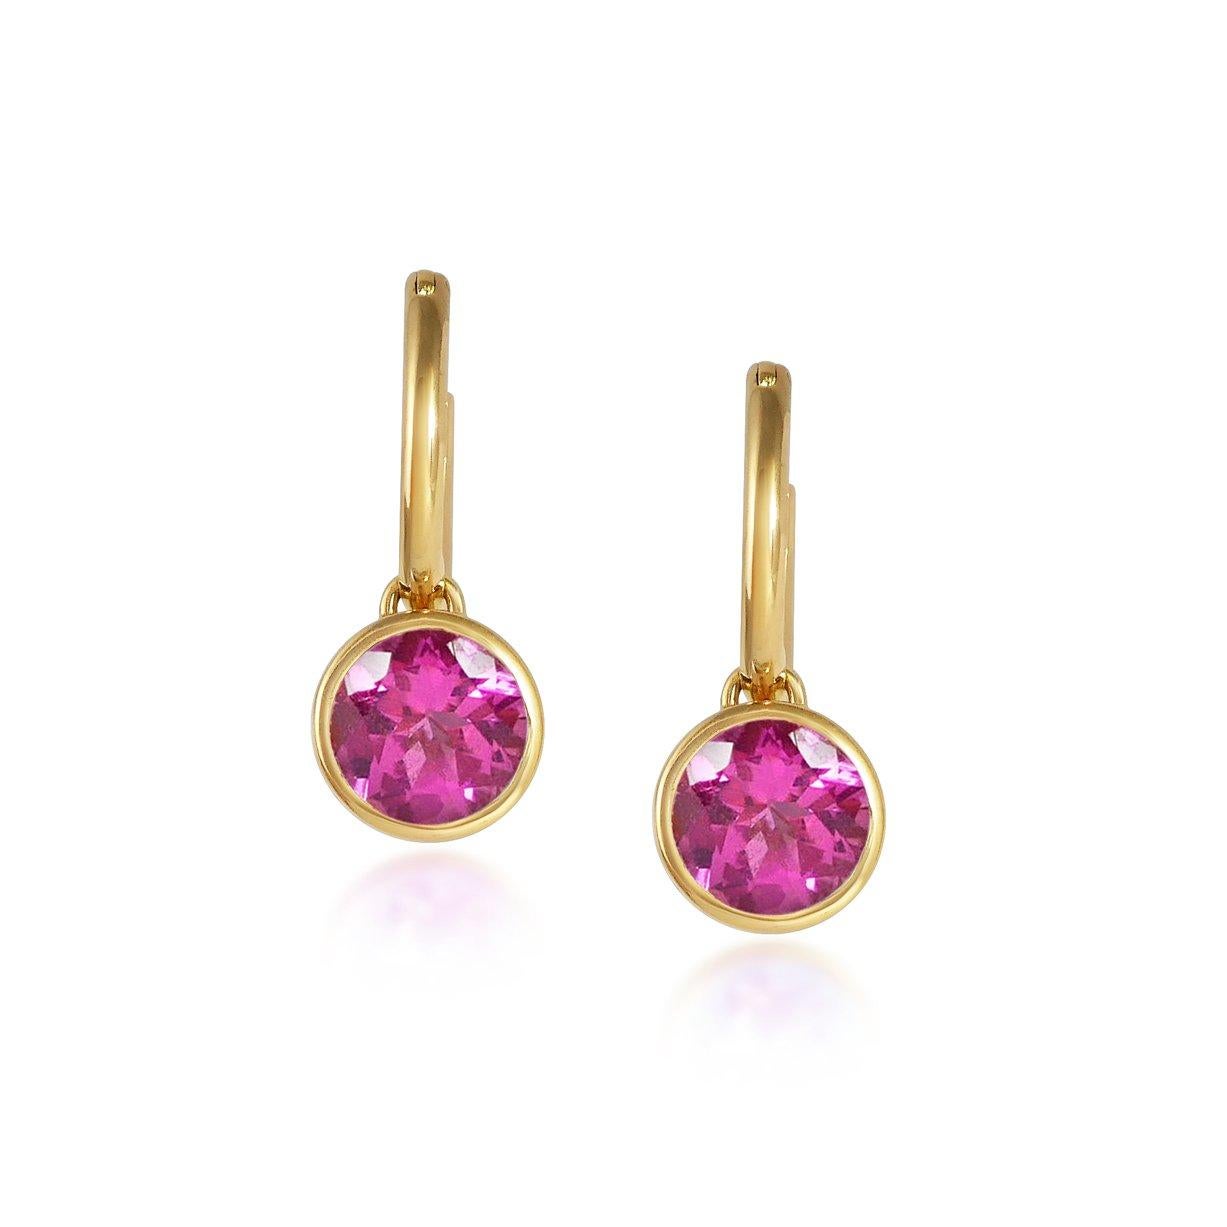 Round Cut Handcrafted 2.60 Carats Pink Tourmaline 18 Karat Yellow Gold Drop Earrings For Sale